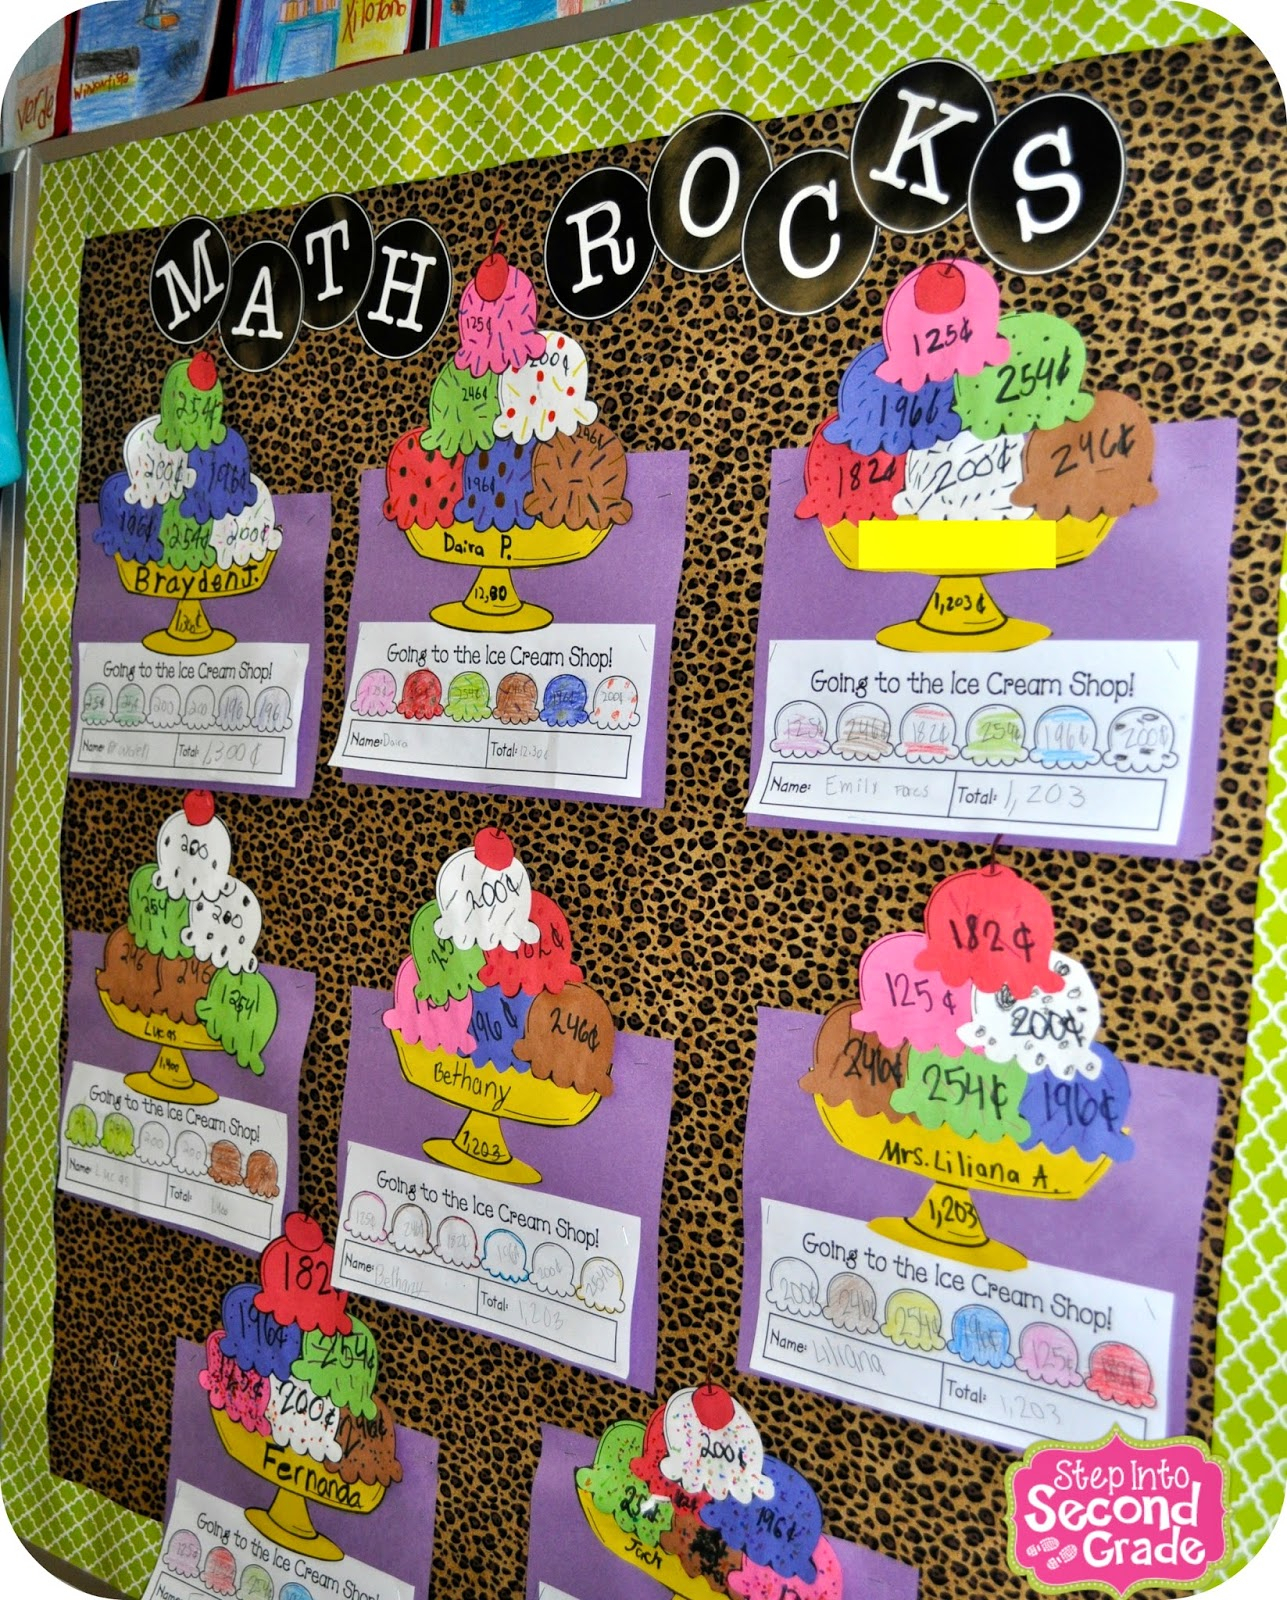 10 Most Popular Open House Ideas For Third Grade open house 2015 step into 2nd grade 1 2024